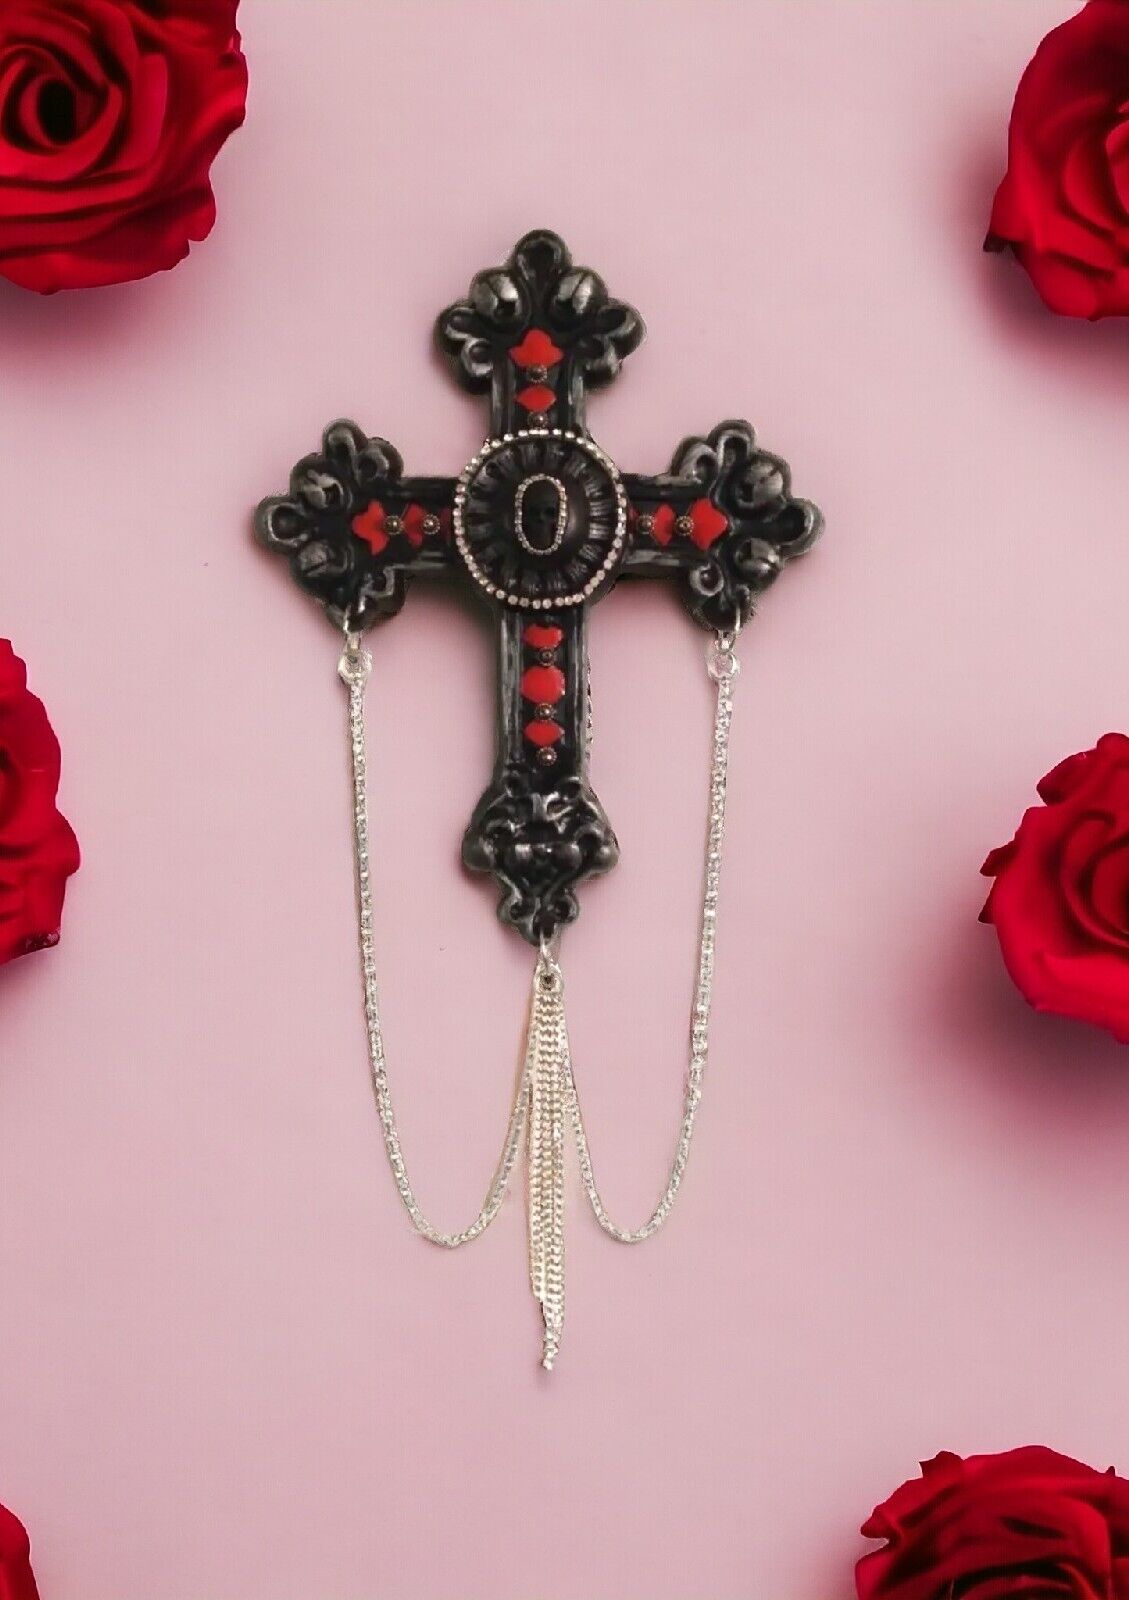 Cross Wall Hanging Black and Red Chains Emo Rock Heavy Metal